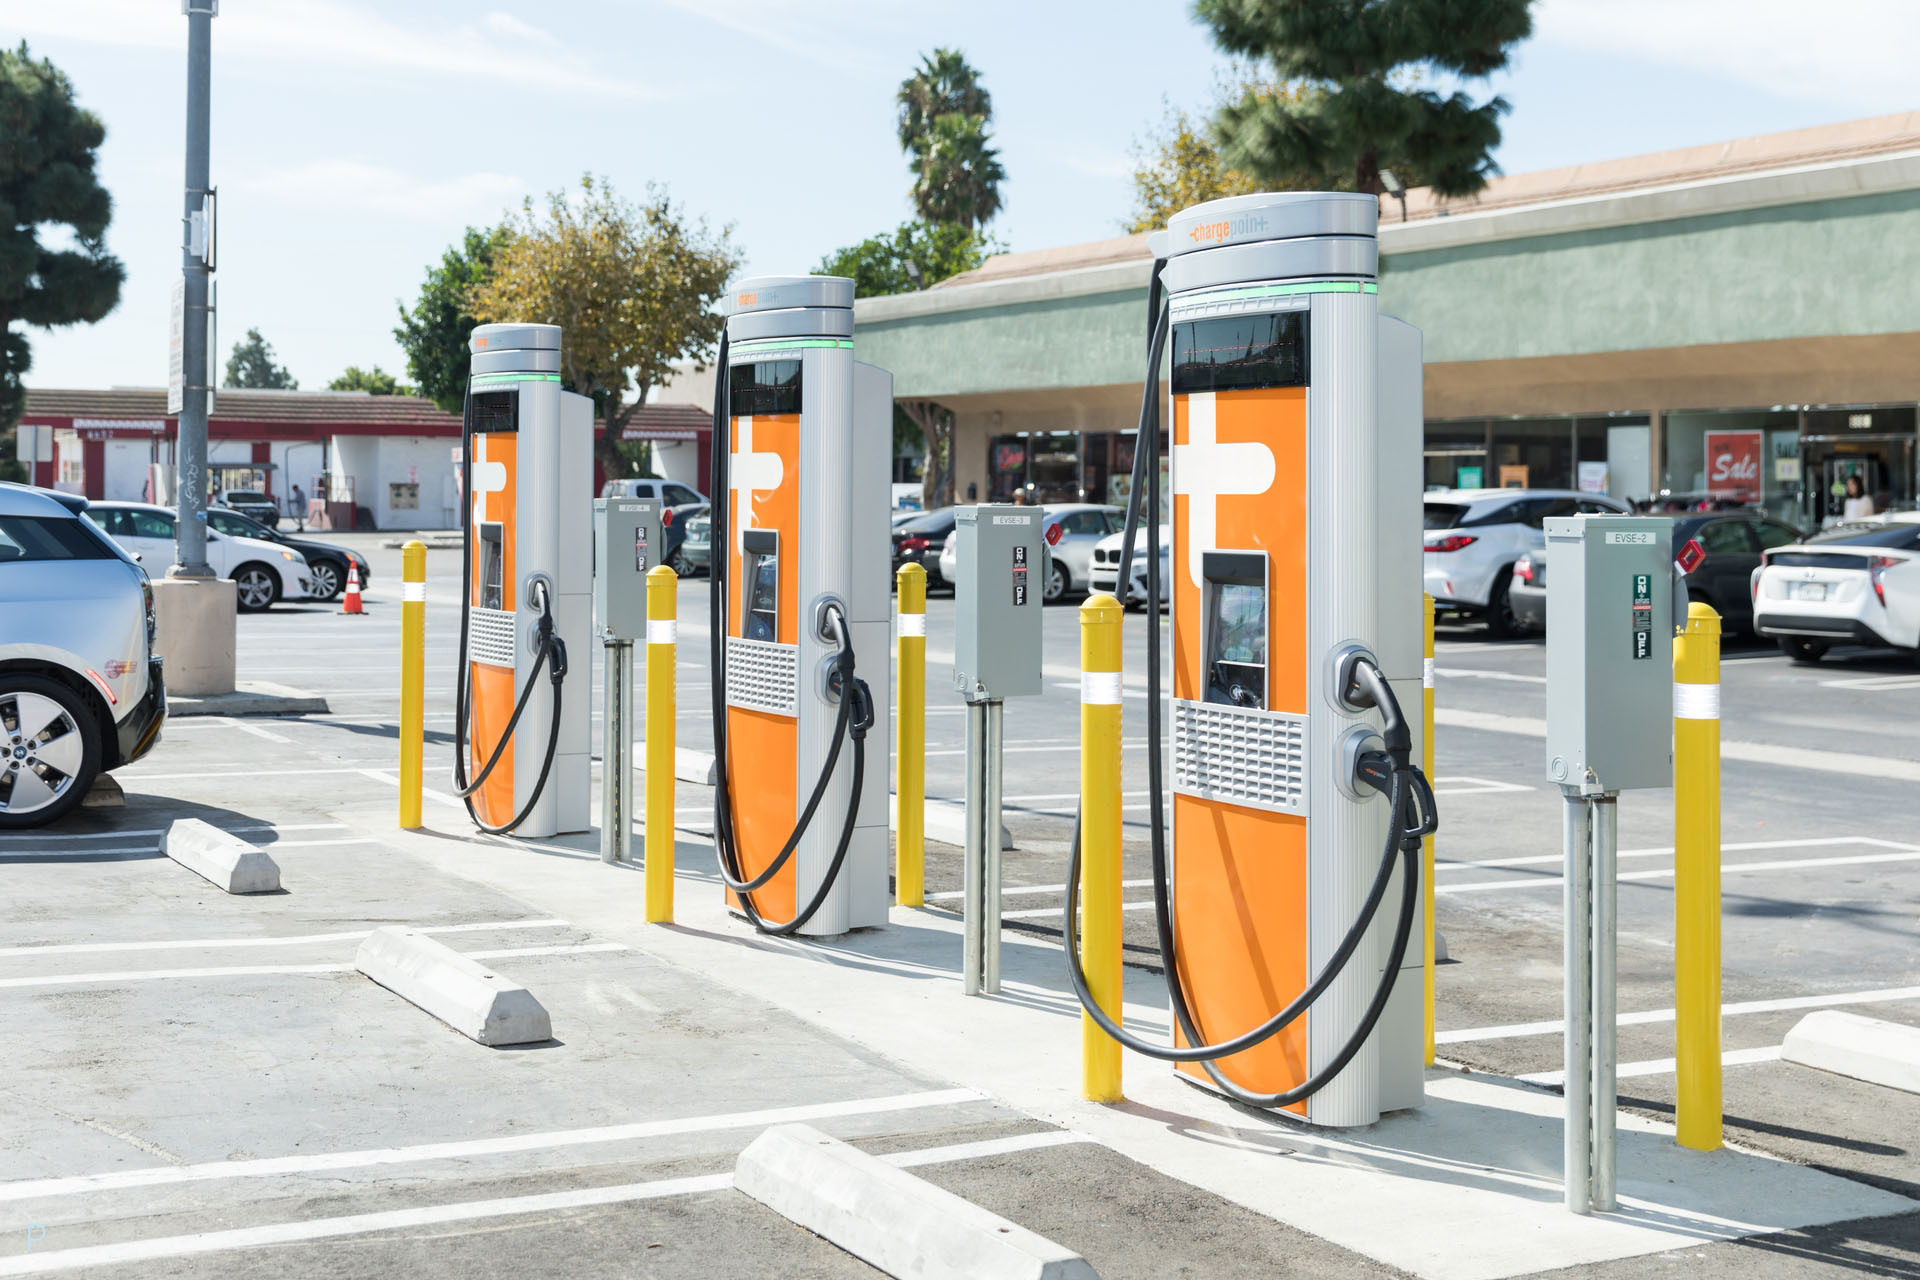 chargepoint-may-be-going-public-through-reverse-merger-report-drive